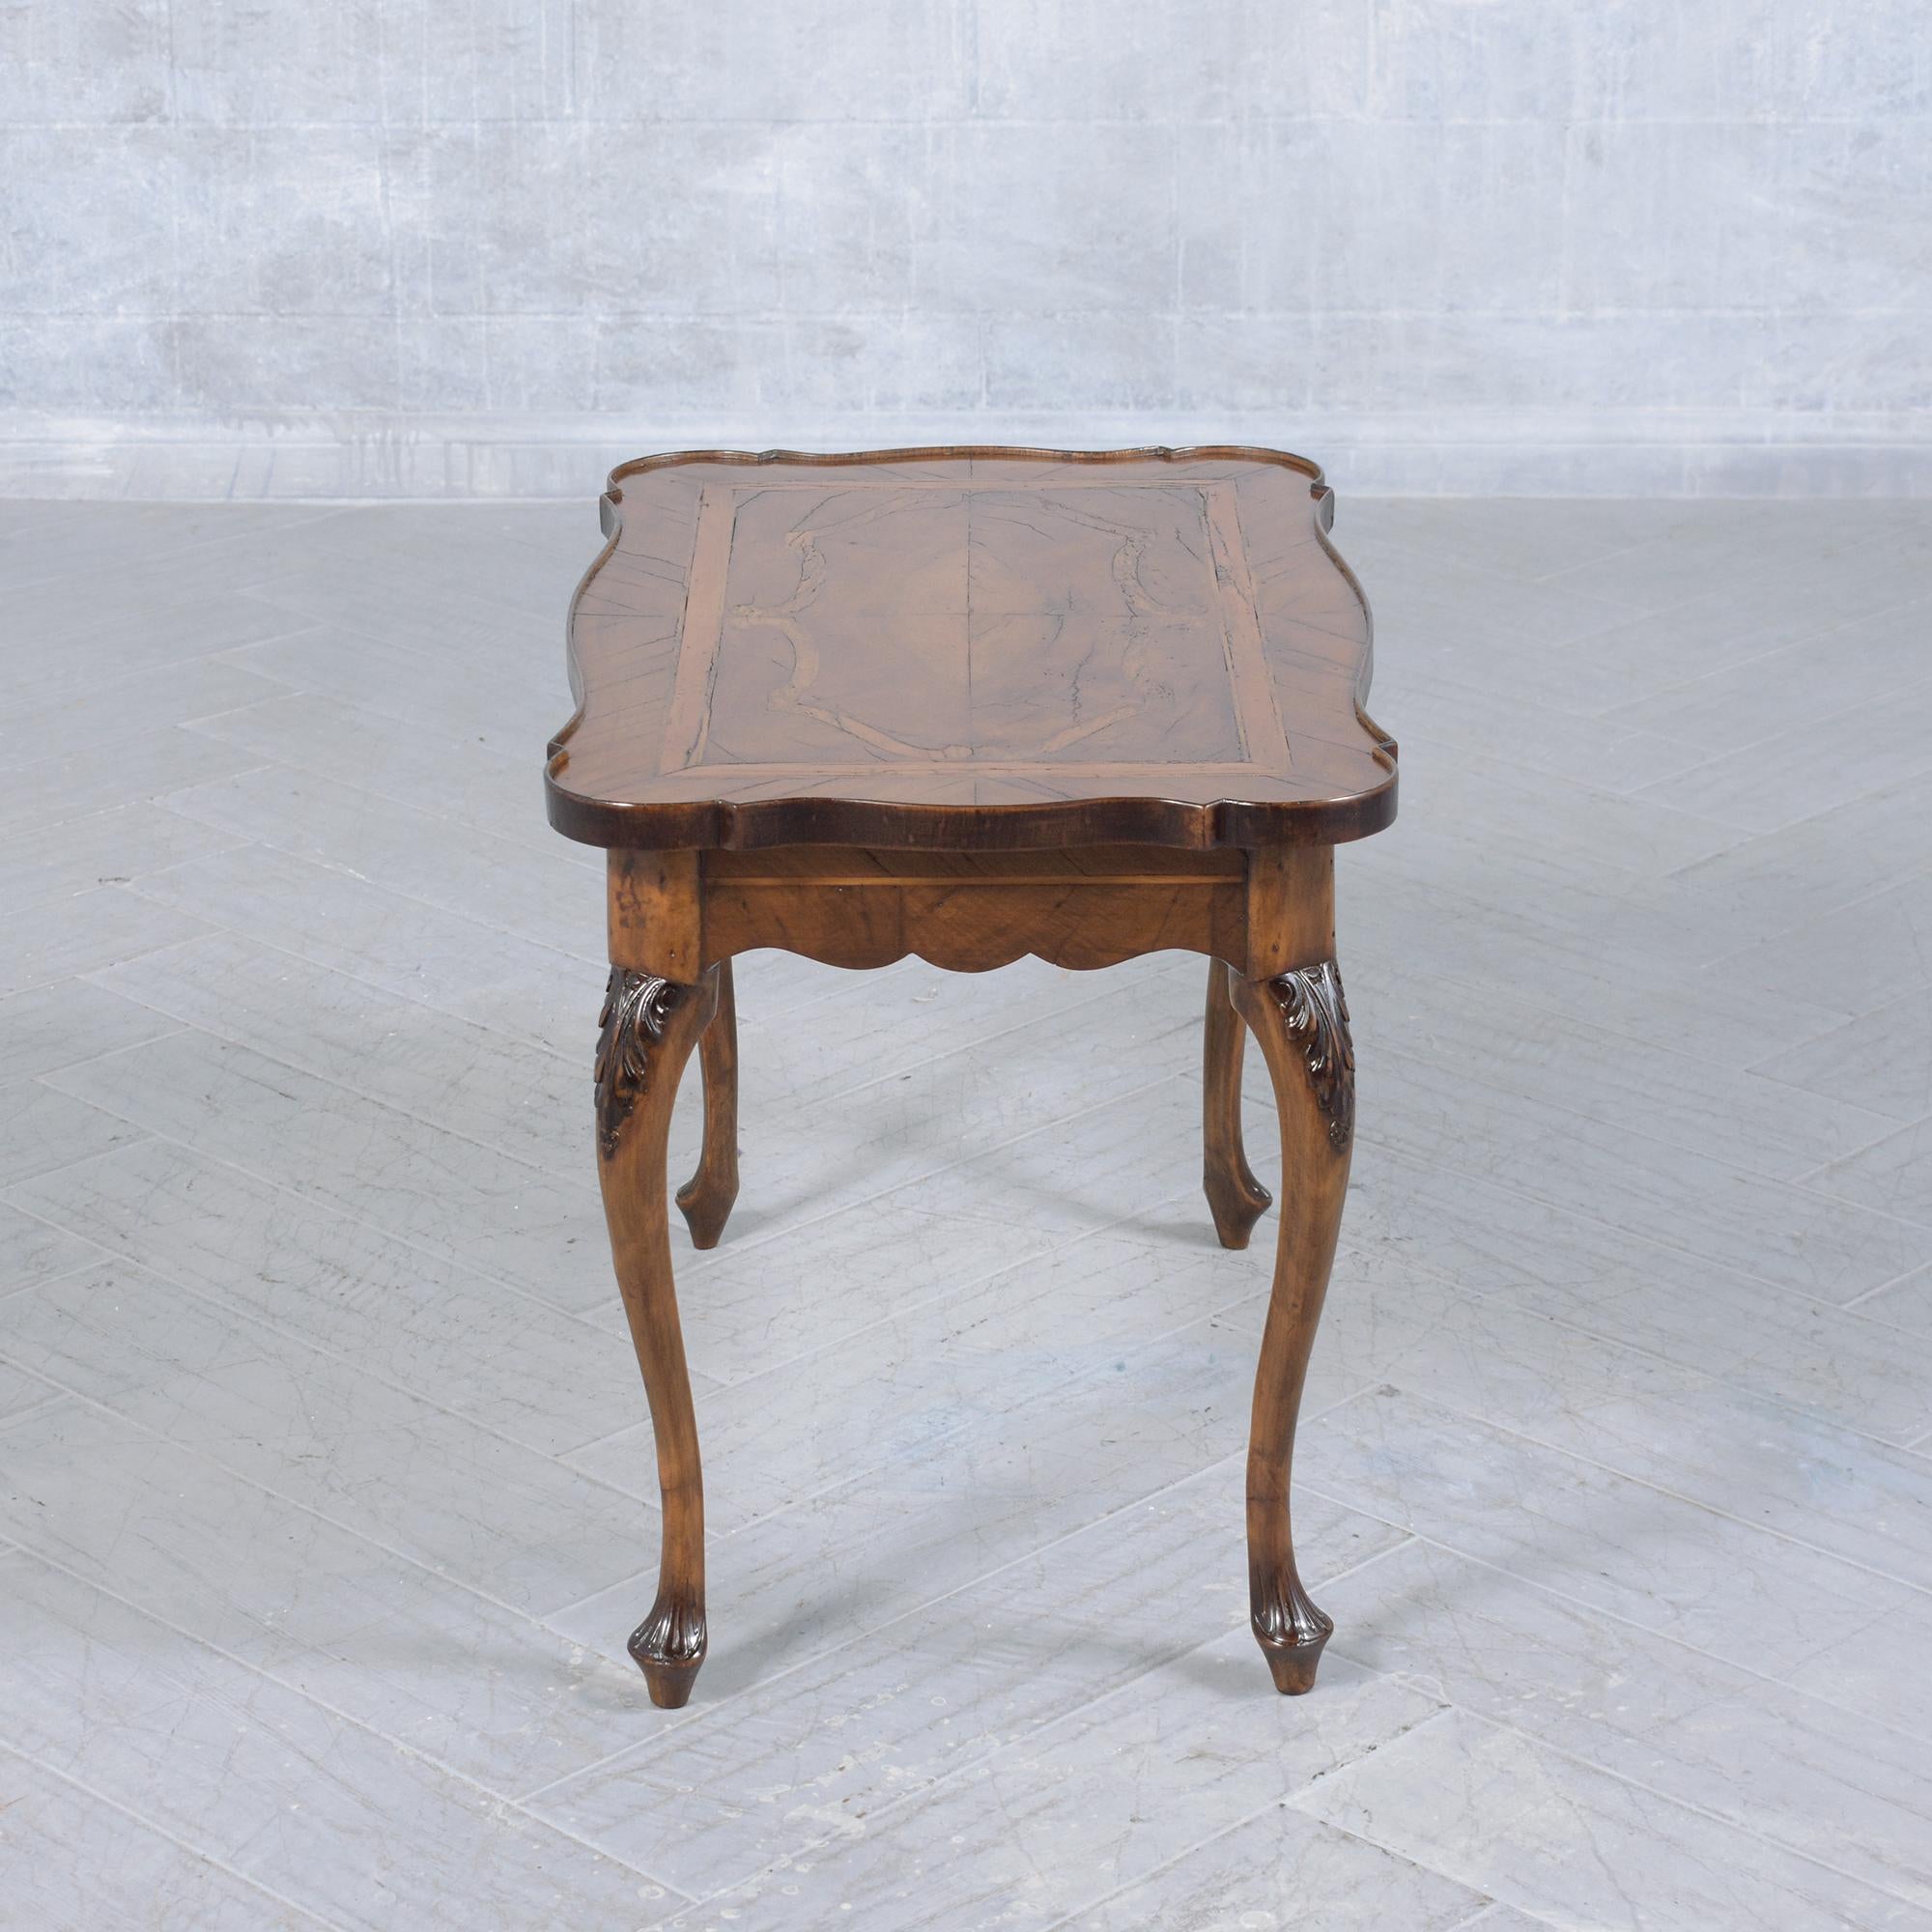 Late 19th-Century English Walnut Side Table with Inlaid Pattern For Sale 5